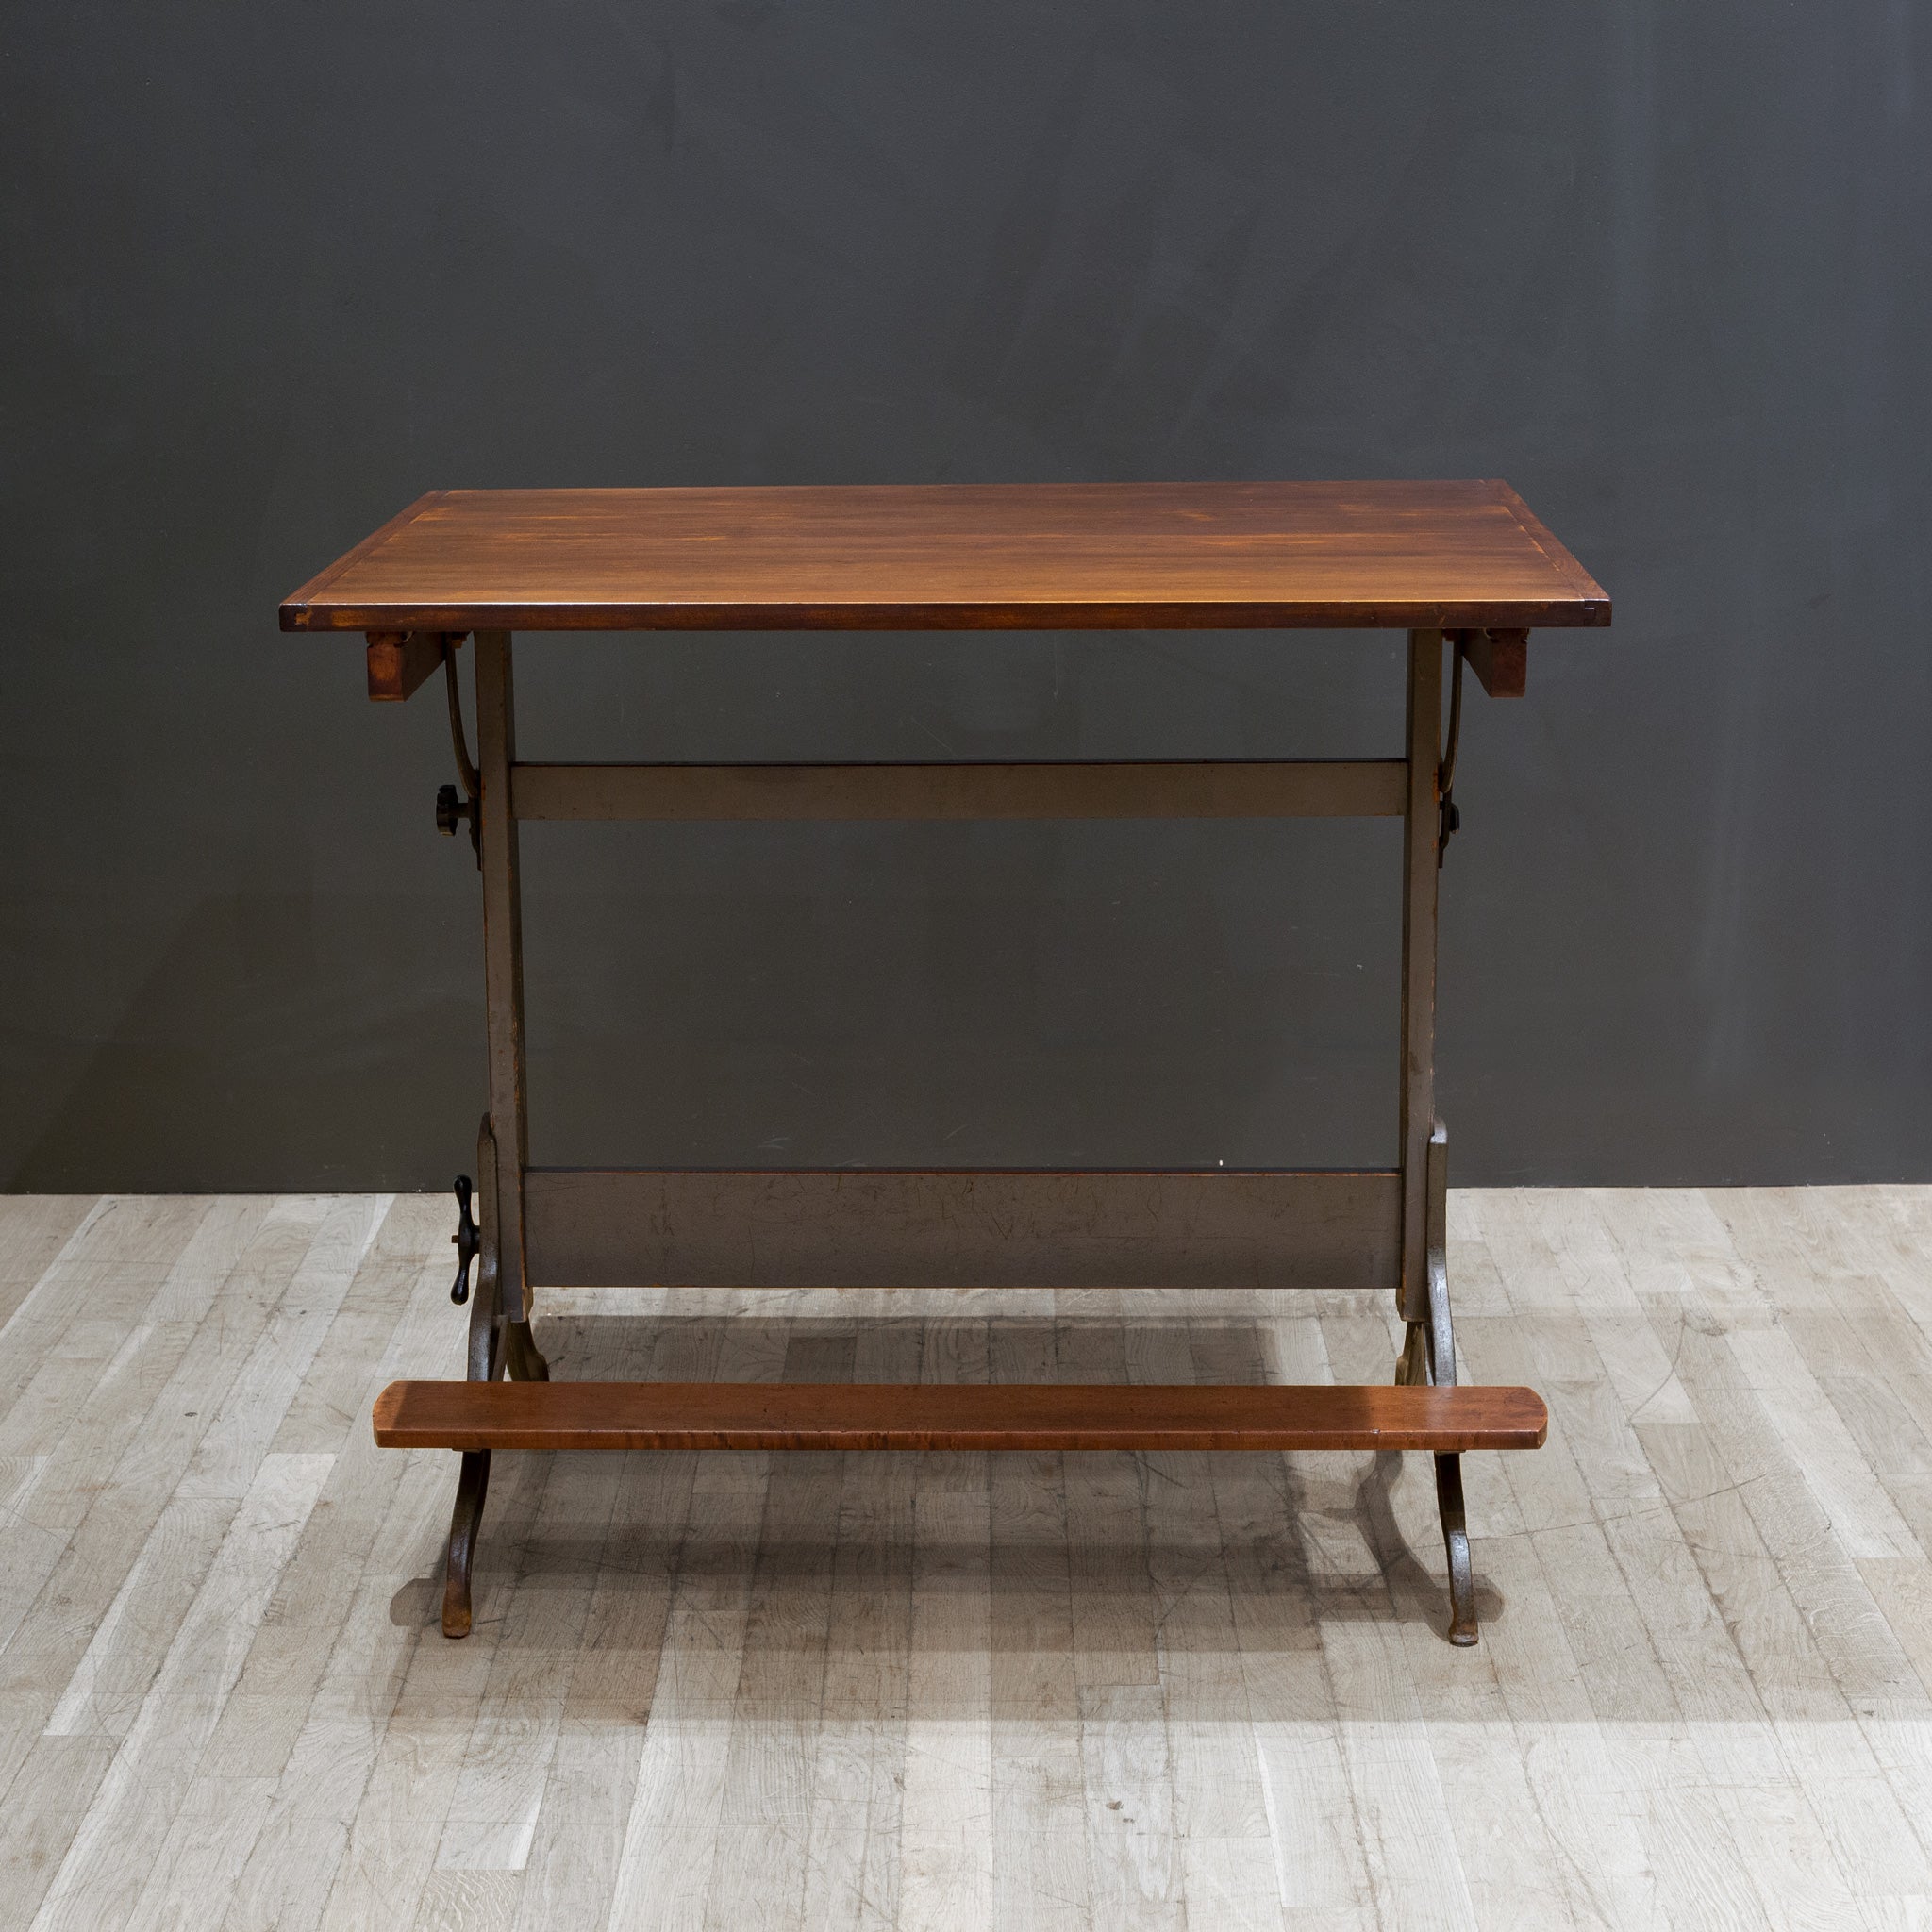 Antique Hamilton Mfg. Co. Drafting Table with Footrest c.1930 